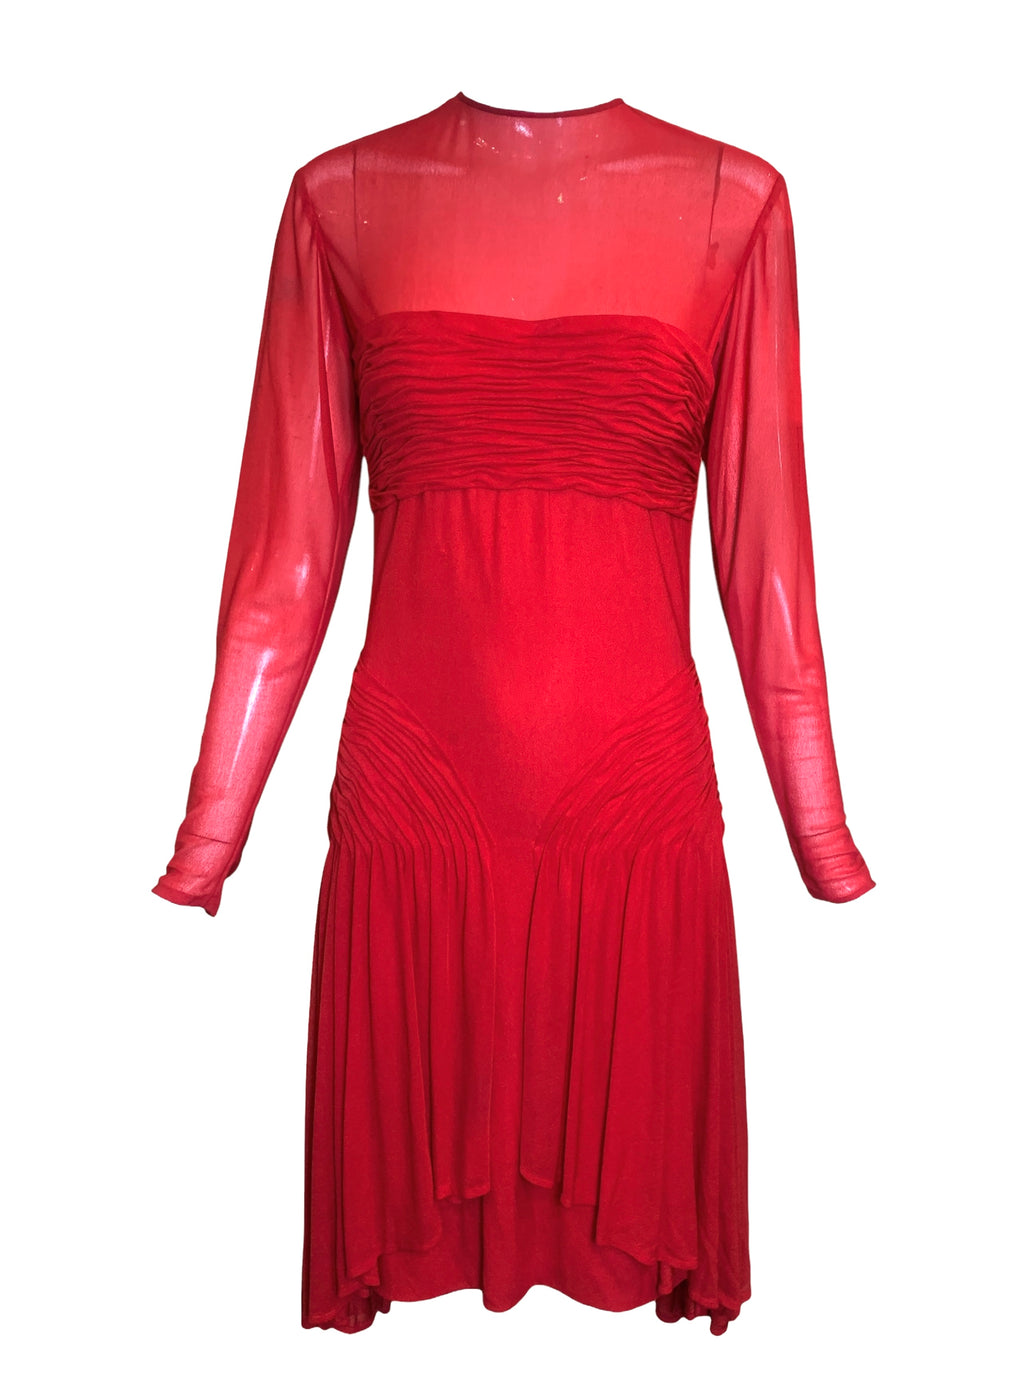 '80s Red Ruched Semi-Sheer Jersey Cocktail Dress FRONT